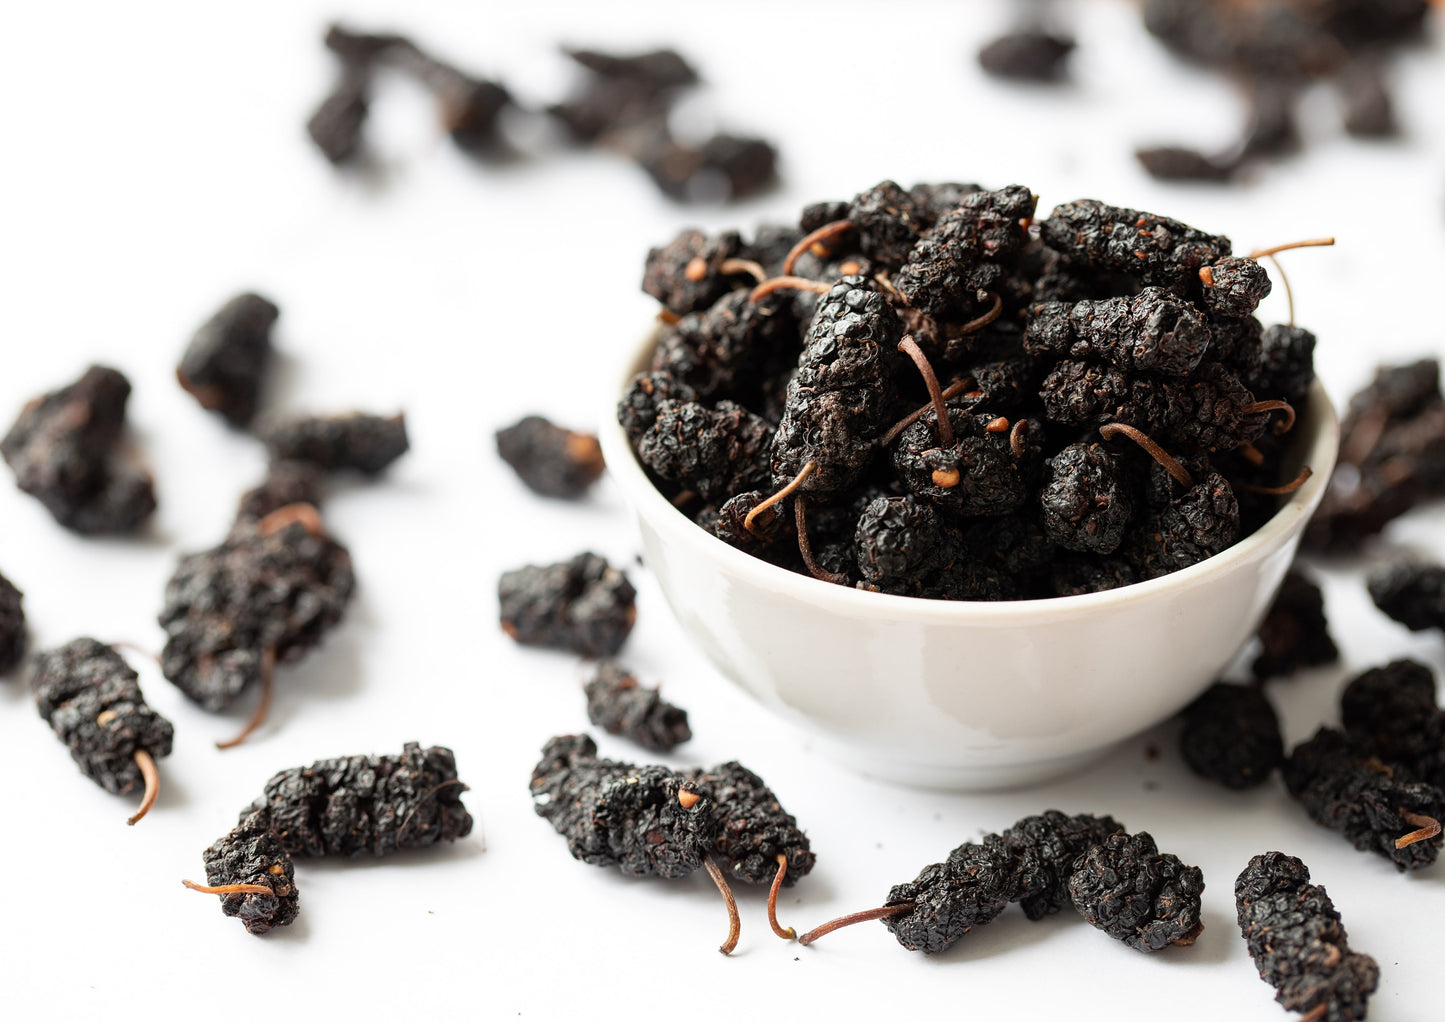 Organic Dried Black Mulberries - Non-GMO, Raw Fruit, Unsulfured, Unsweetened, Vegan, Bulk. Great for Snacking, Desserts, and Granola